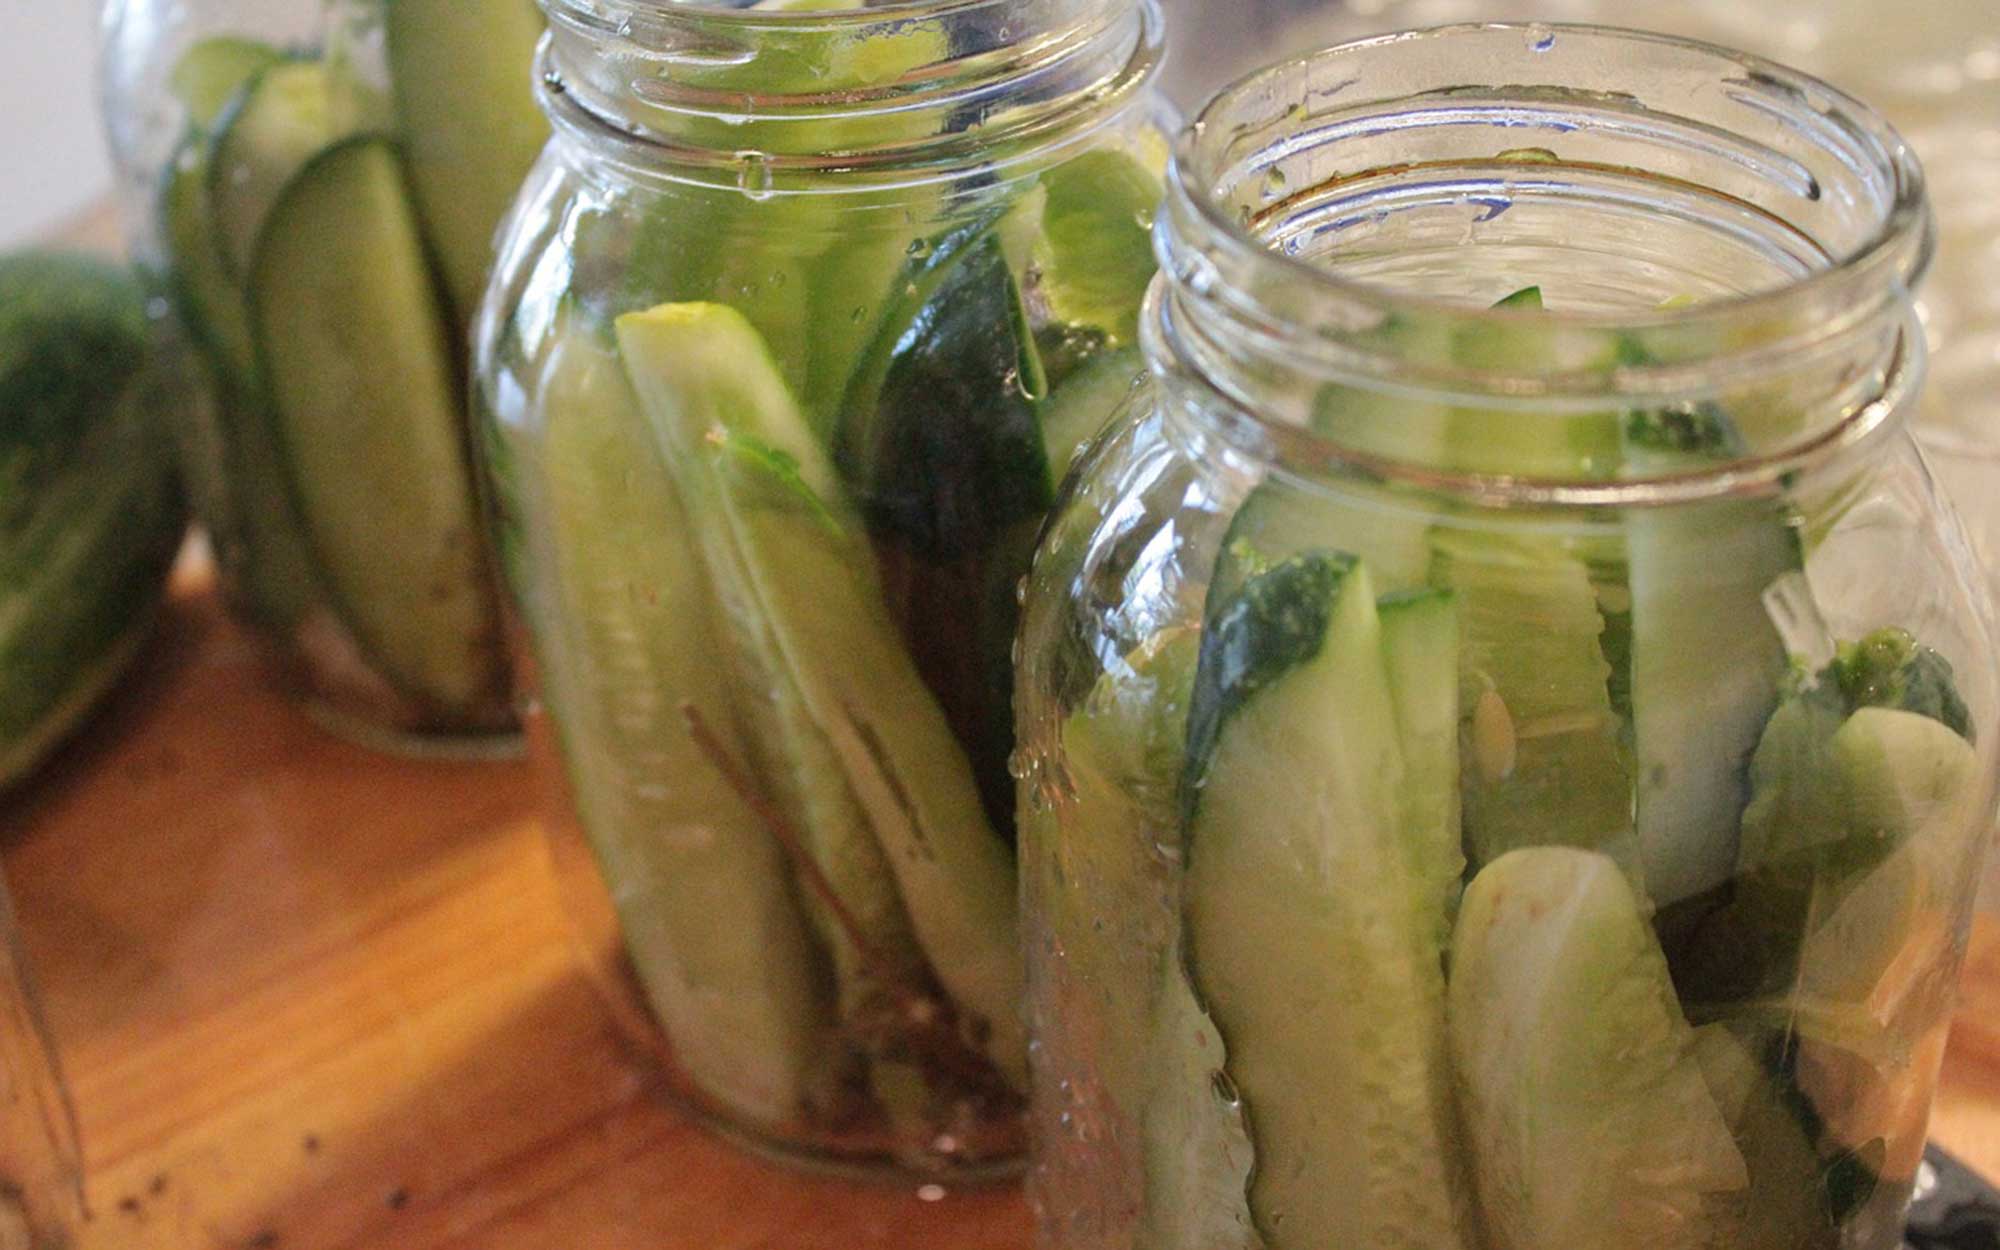 Jars of cut cucumbers being prepared to make dill pickles.